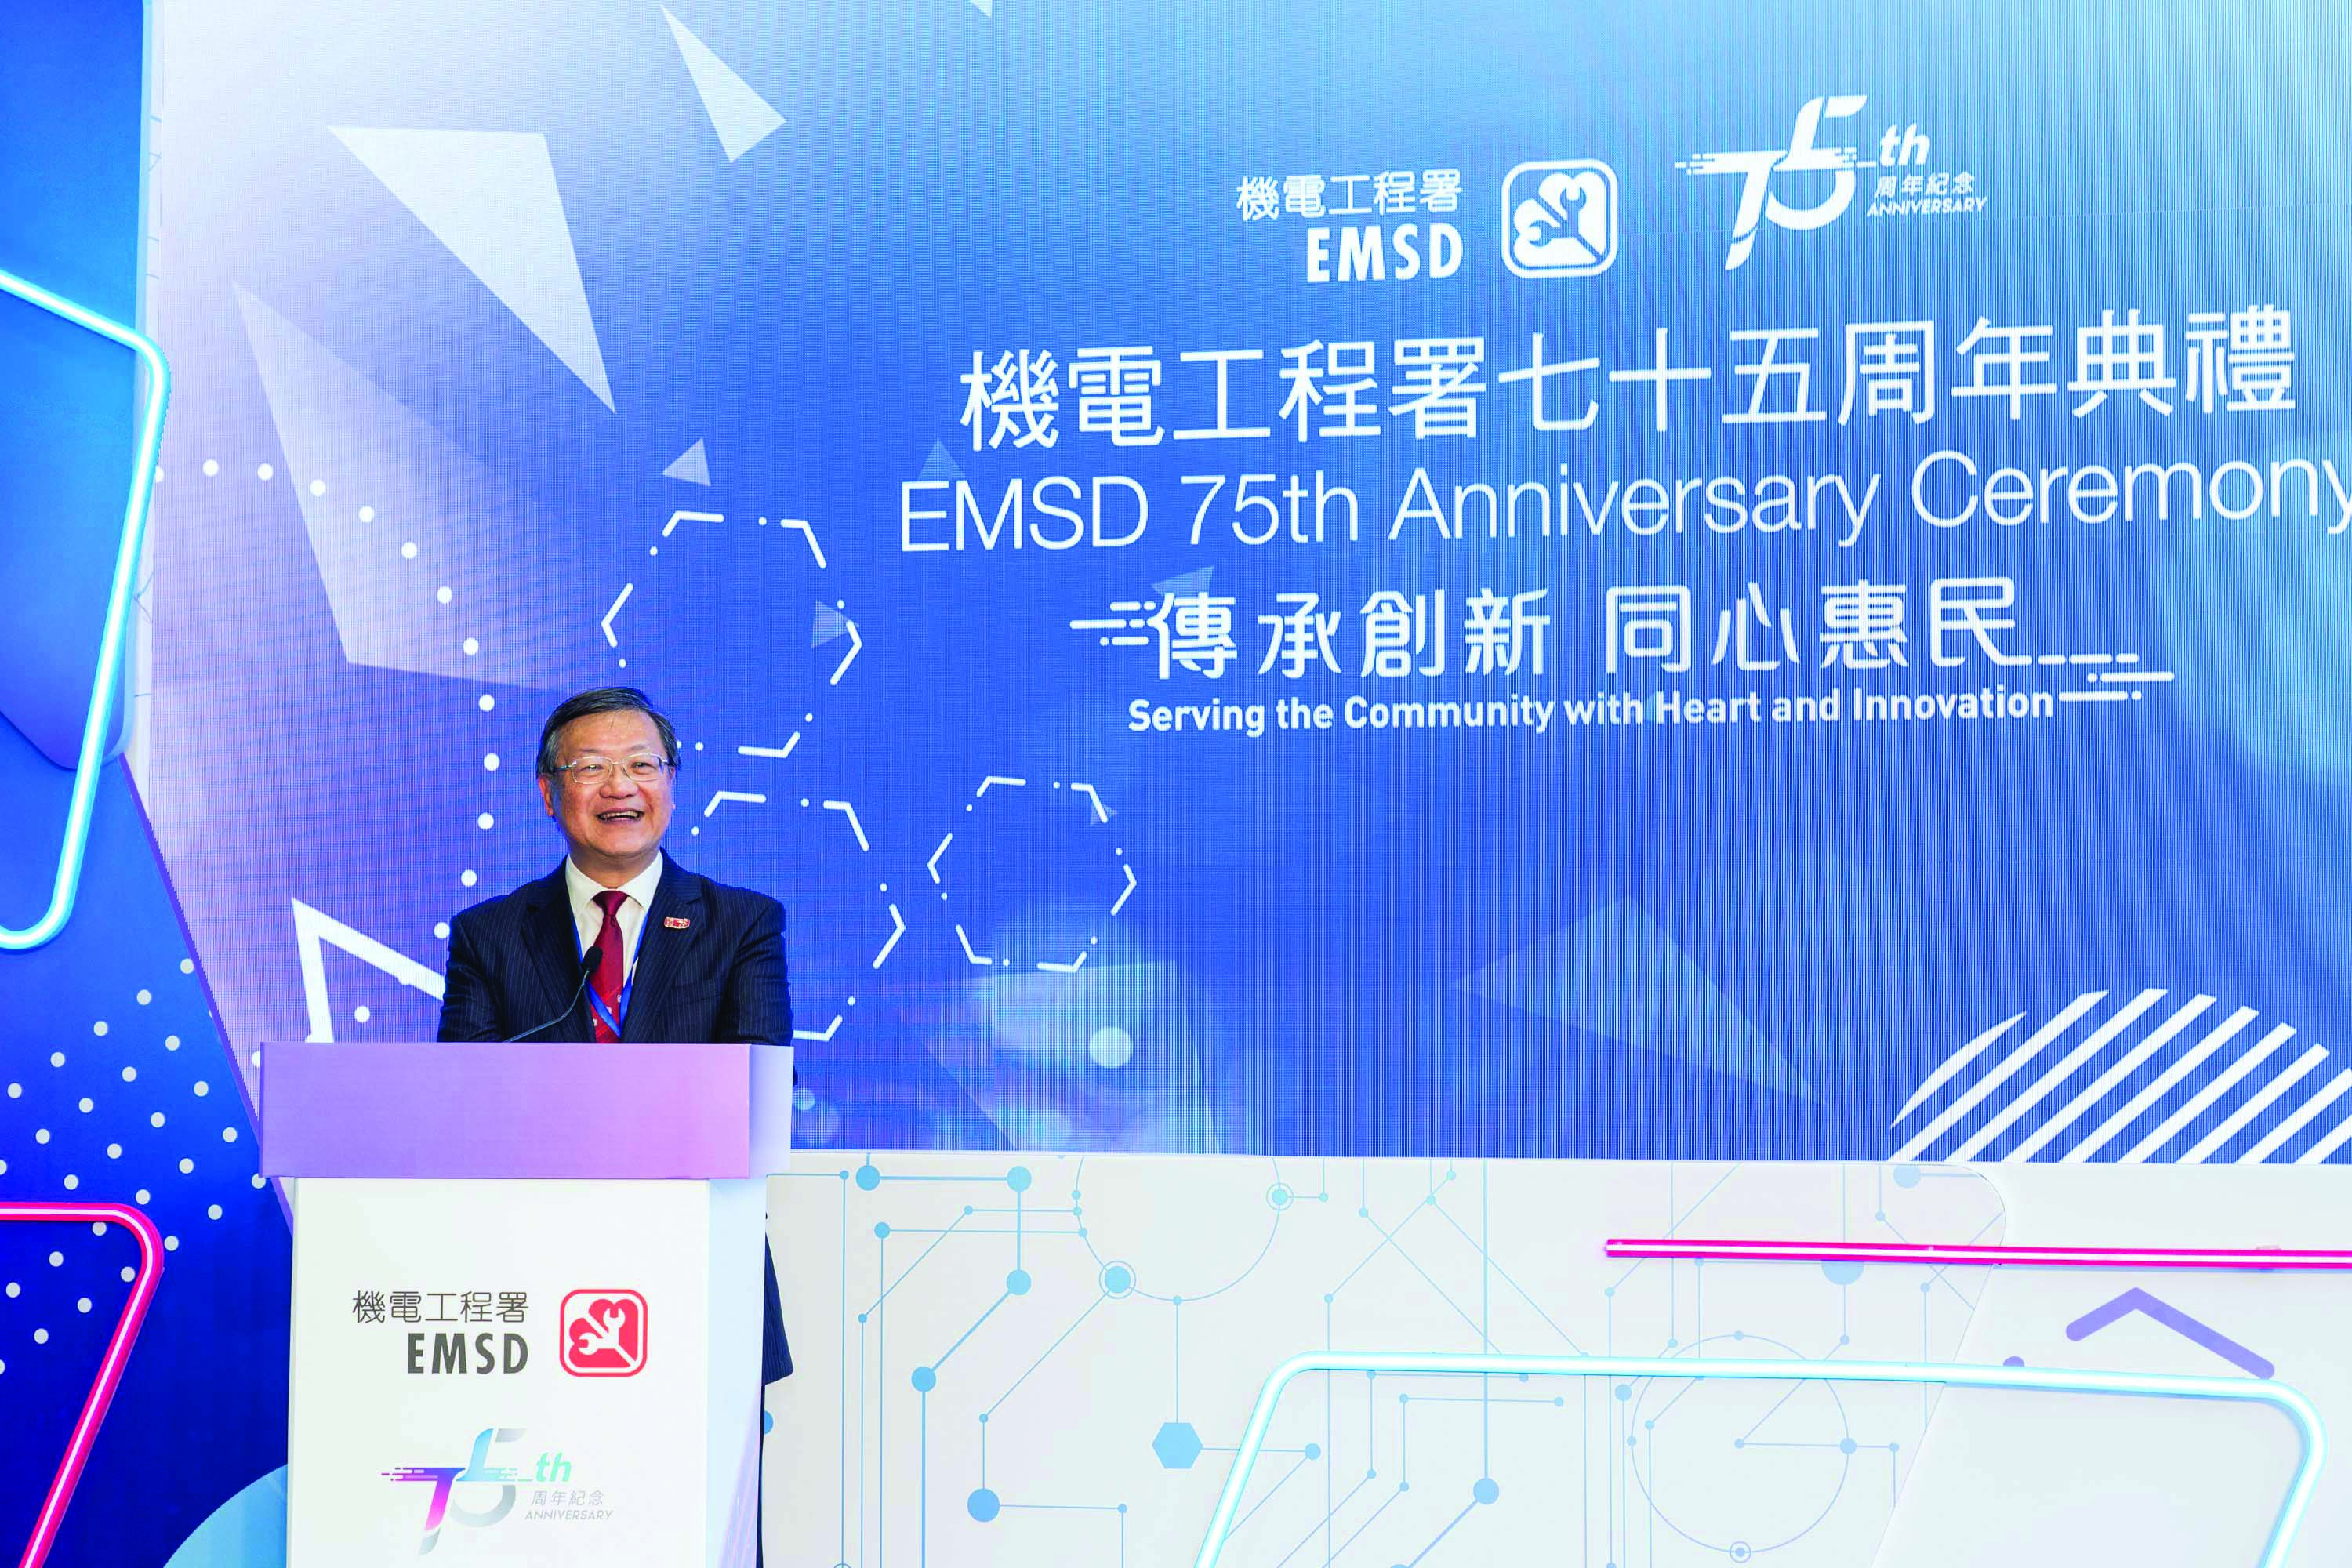 Mr. Pang Yiu-hung, Director of Electrical and Mechanical Services, delivered a speech at the ceremony.